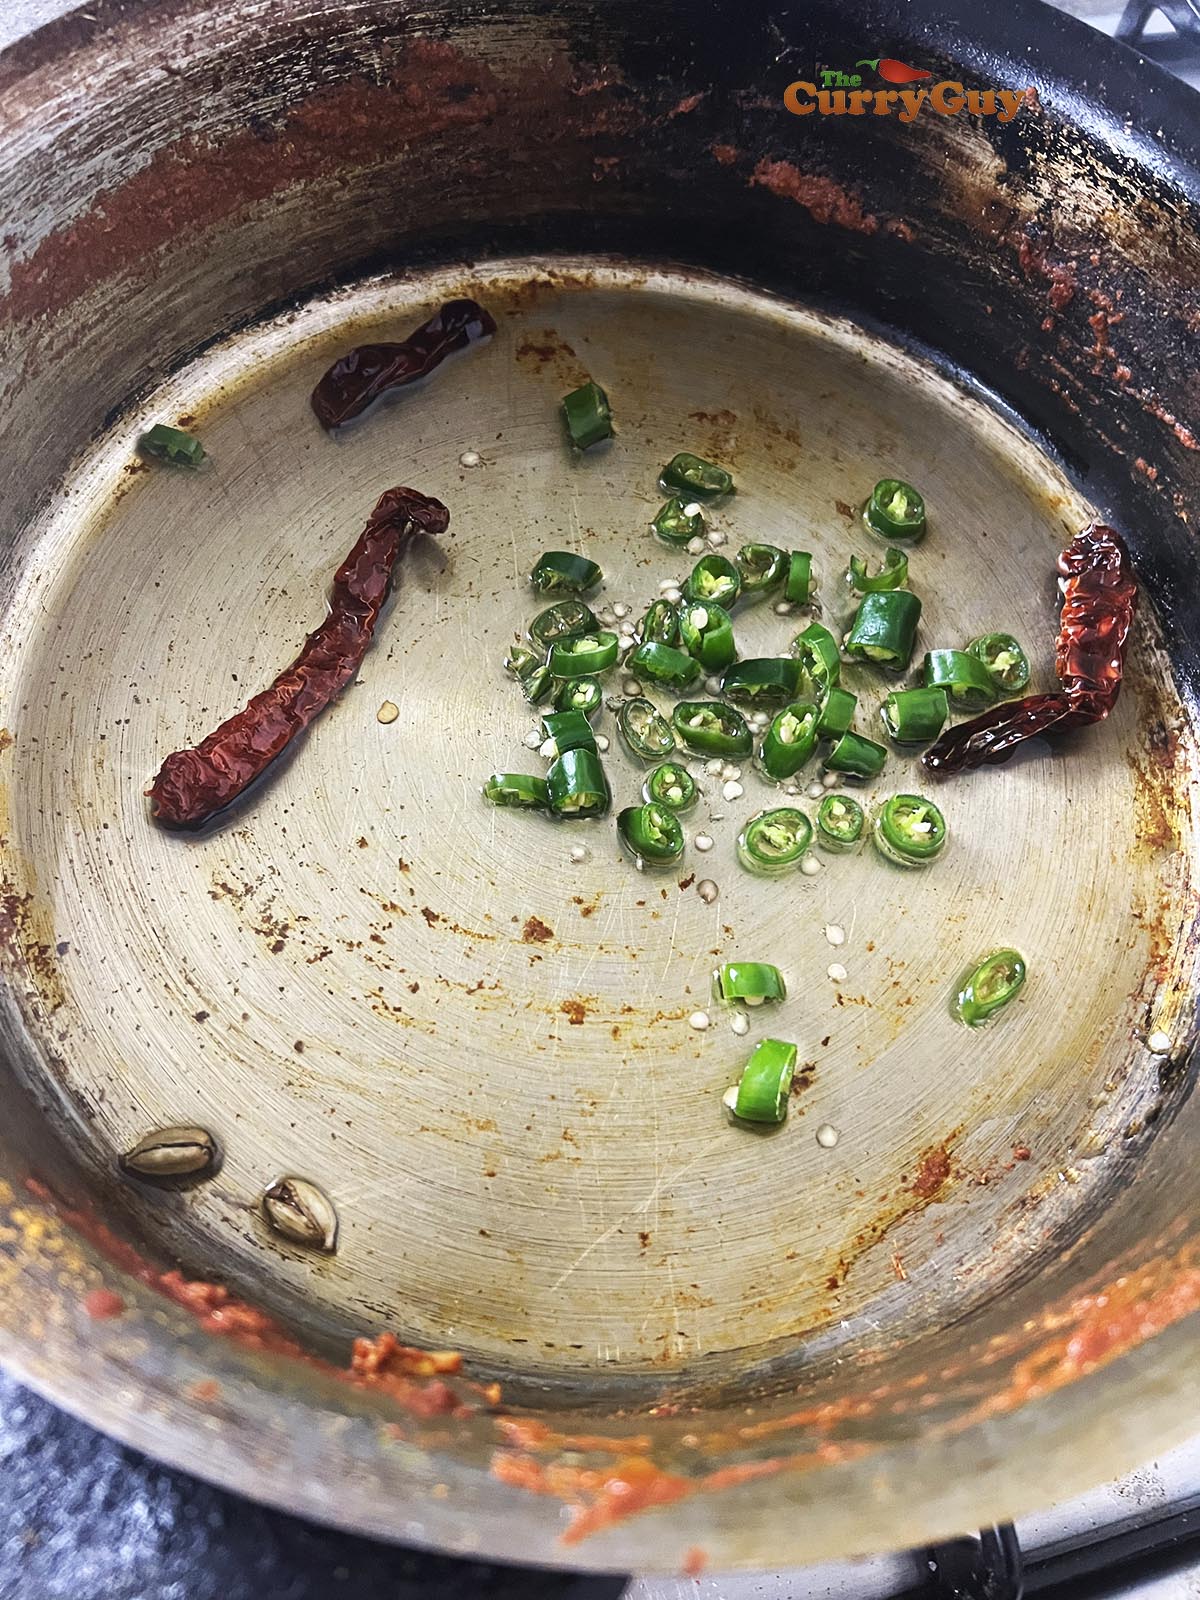 Infusing spices and chillies into oil in the pan